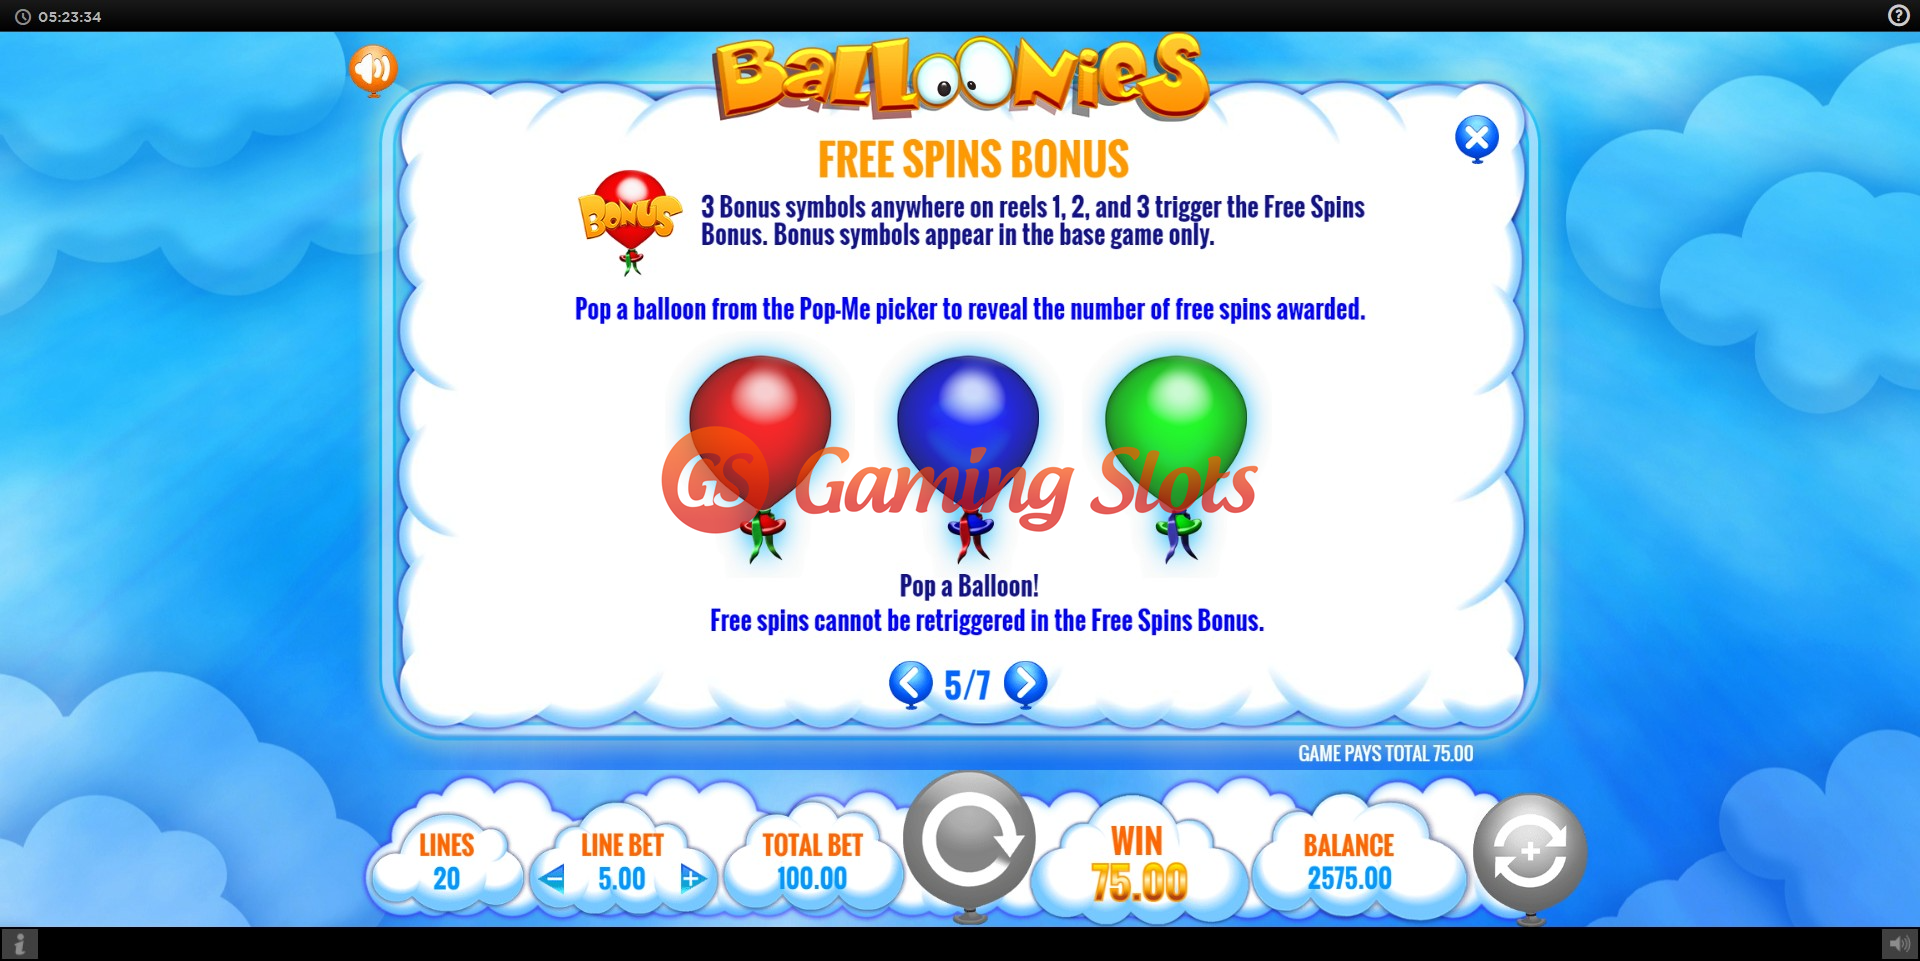 Pay Table for Balloonies slot from IGT